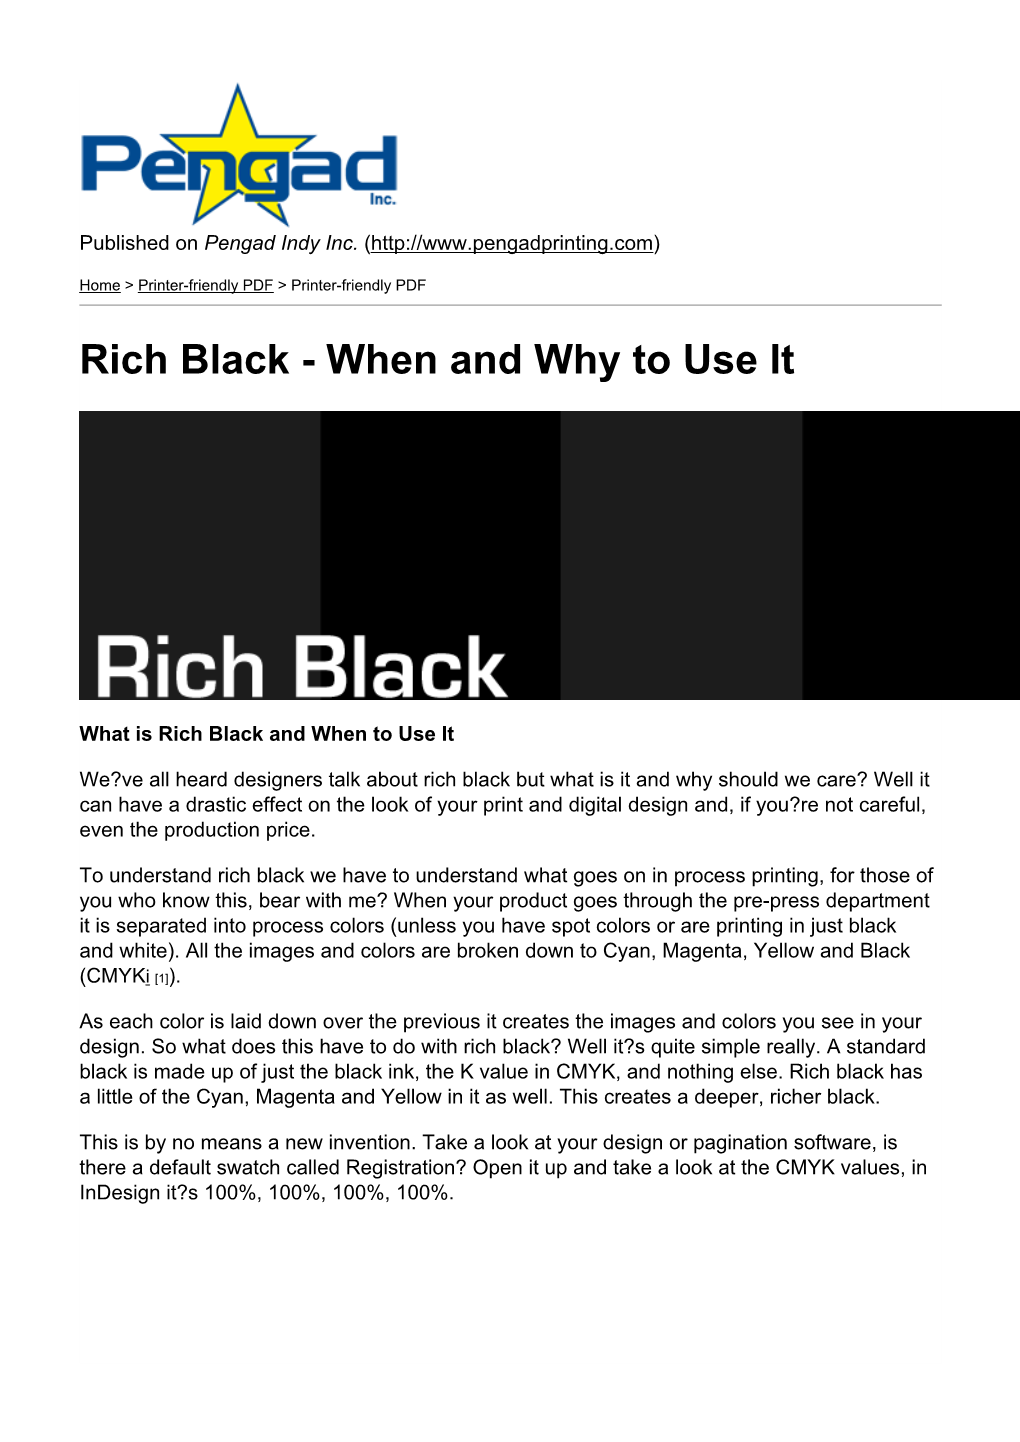 Rich Black - When and Why to Use It